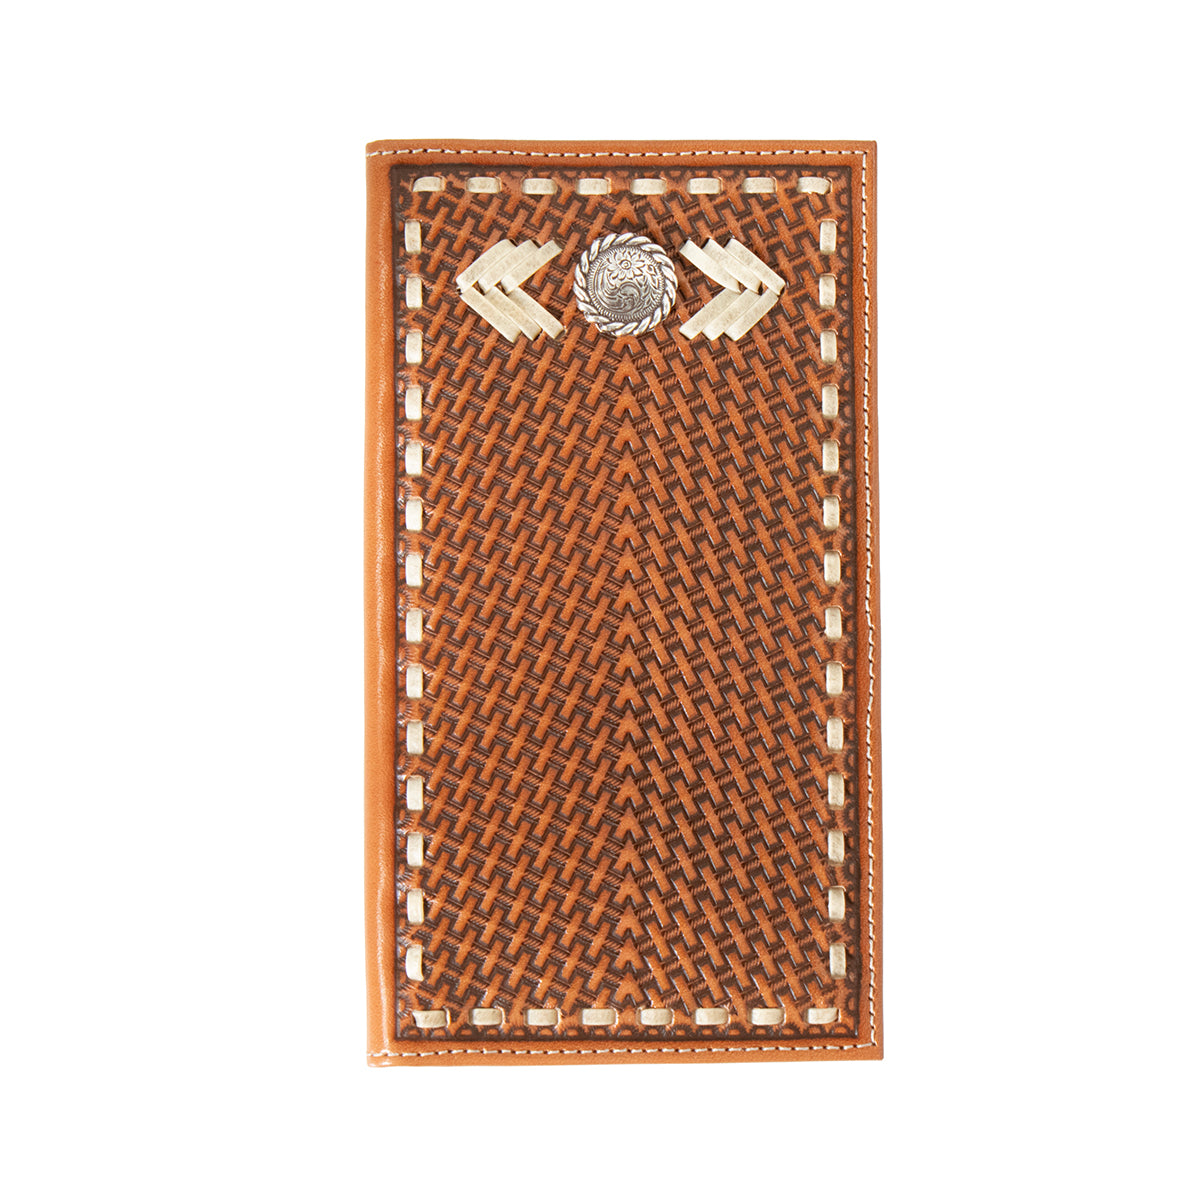 MENS NOCONA RODEO WALLET W/ RAWHIDE LACE